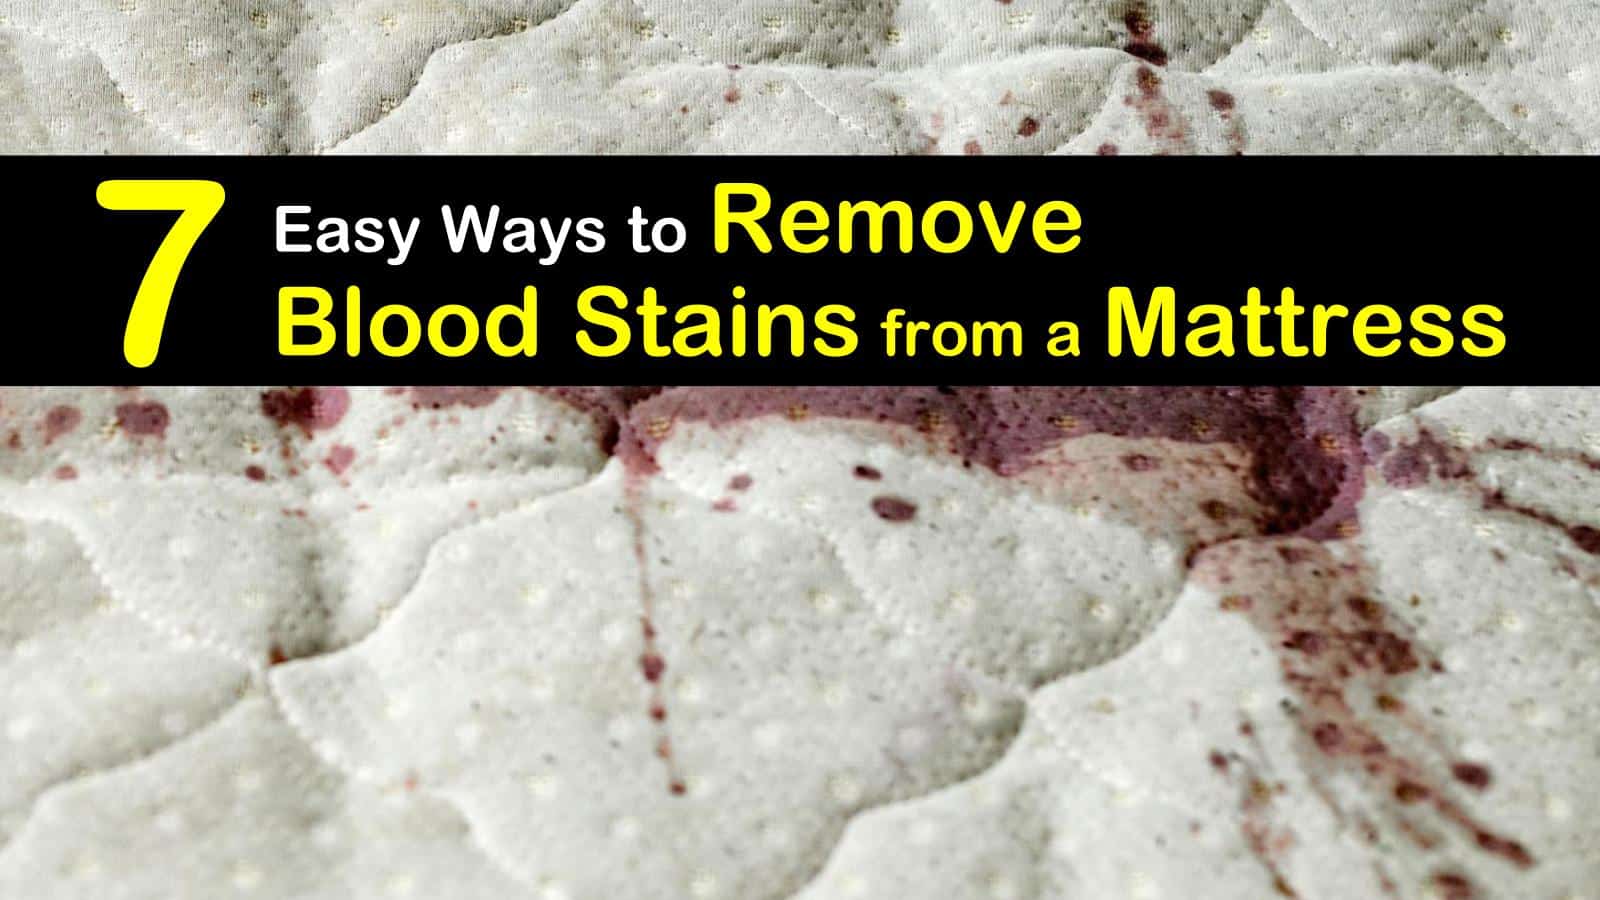 9 Easy Ways to Remove Blood Stains from a Mattress